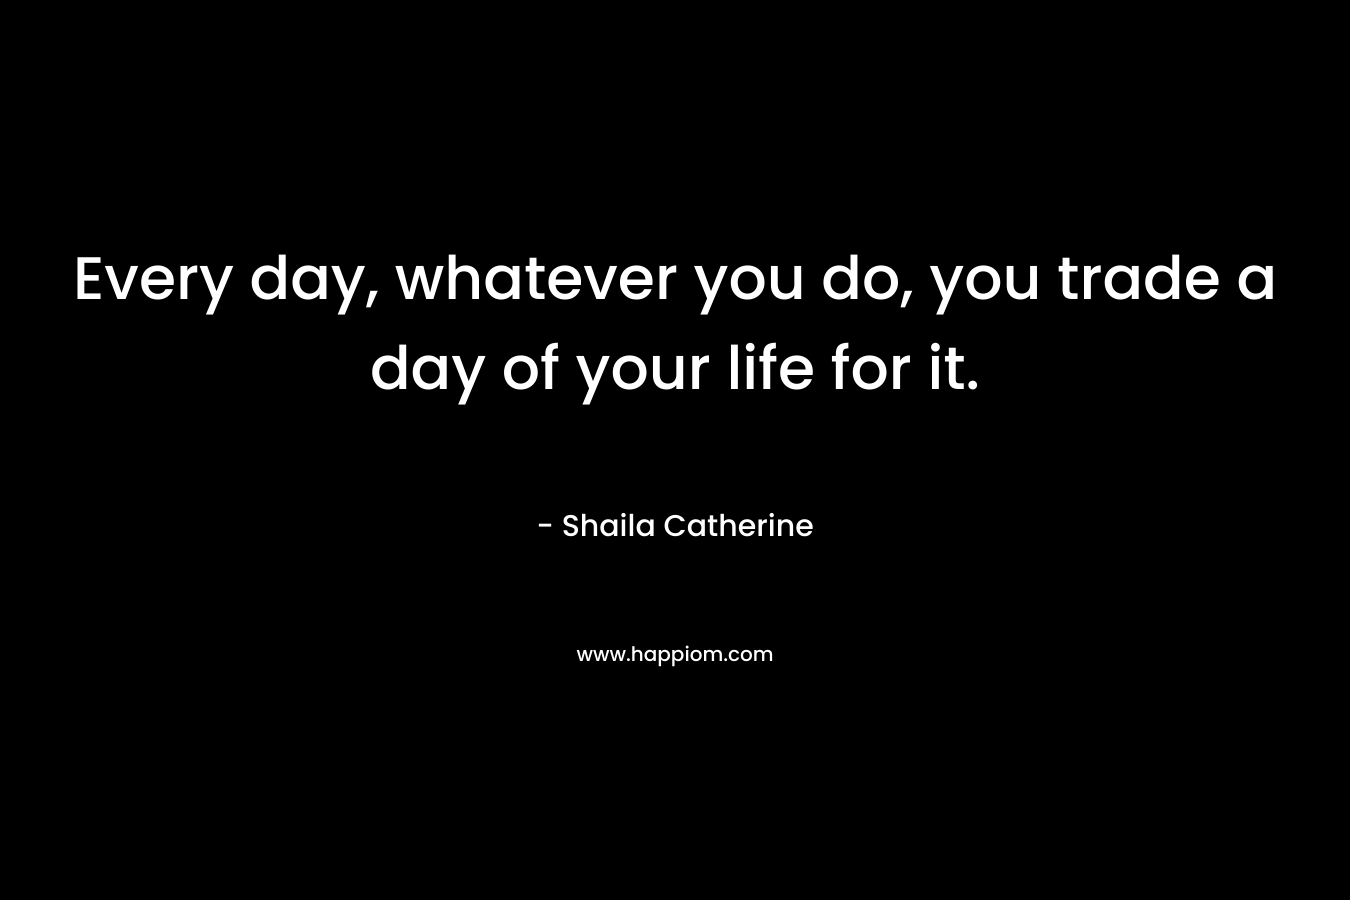 Every day, whatever you do, you trade a day of your life for it.